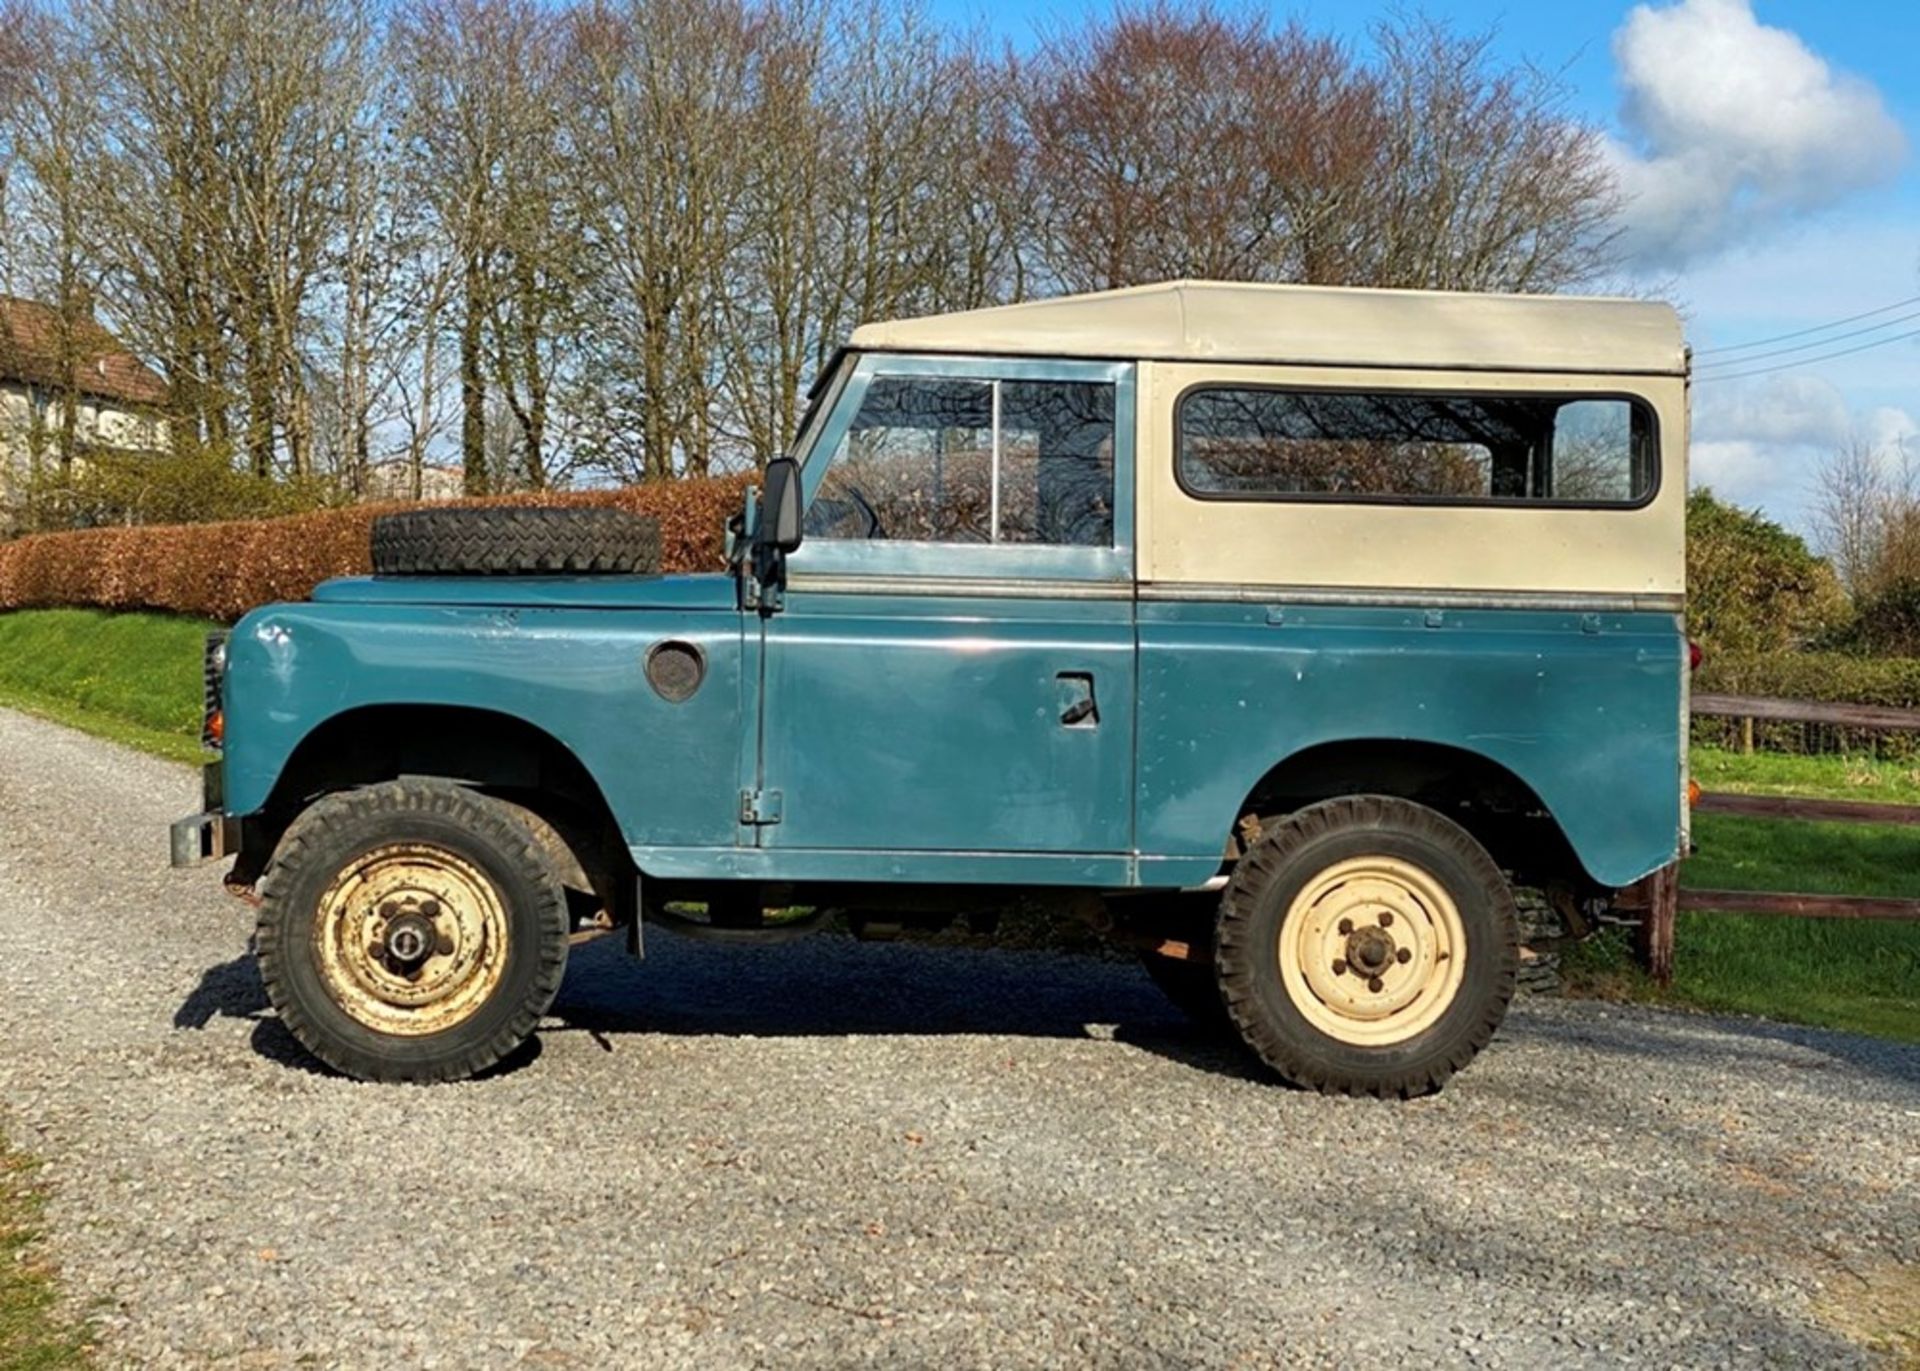 1984 Land Rover Series III - Image 9 of 9